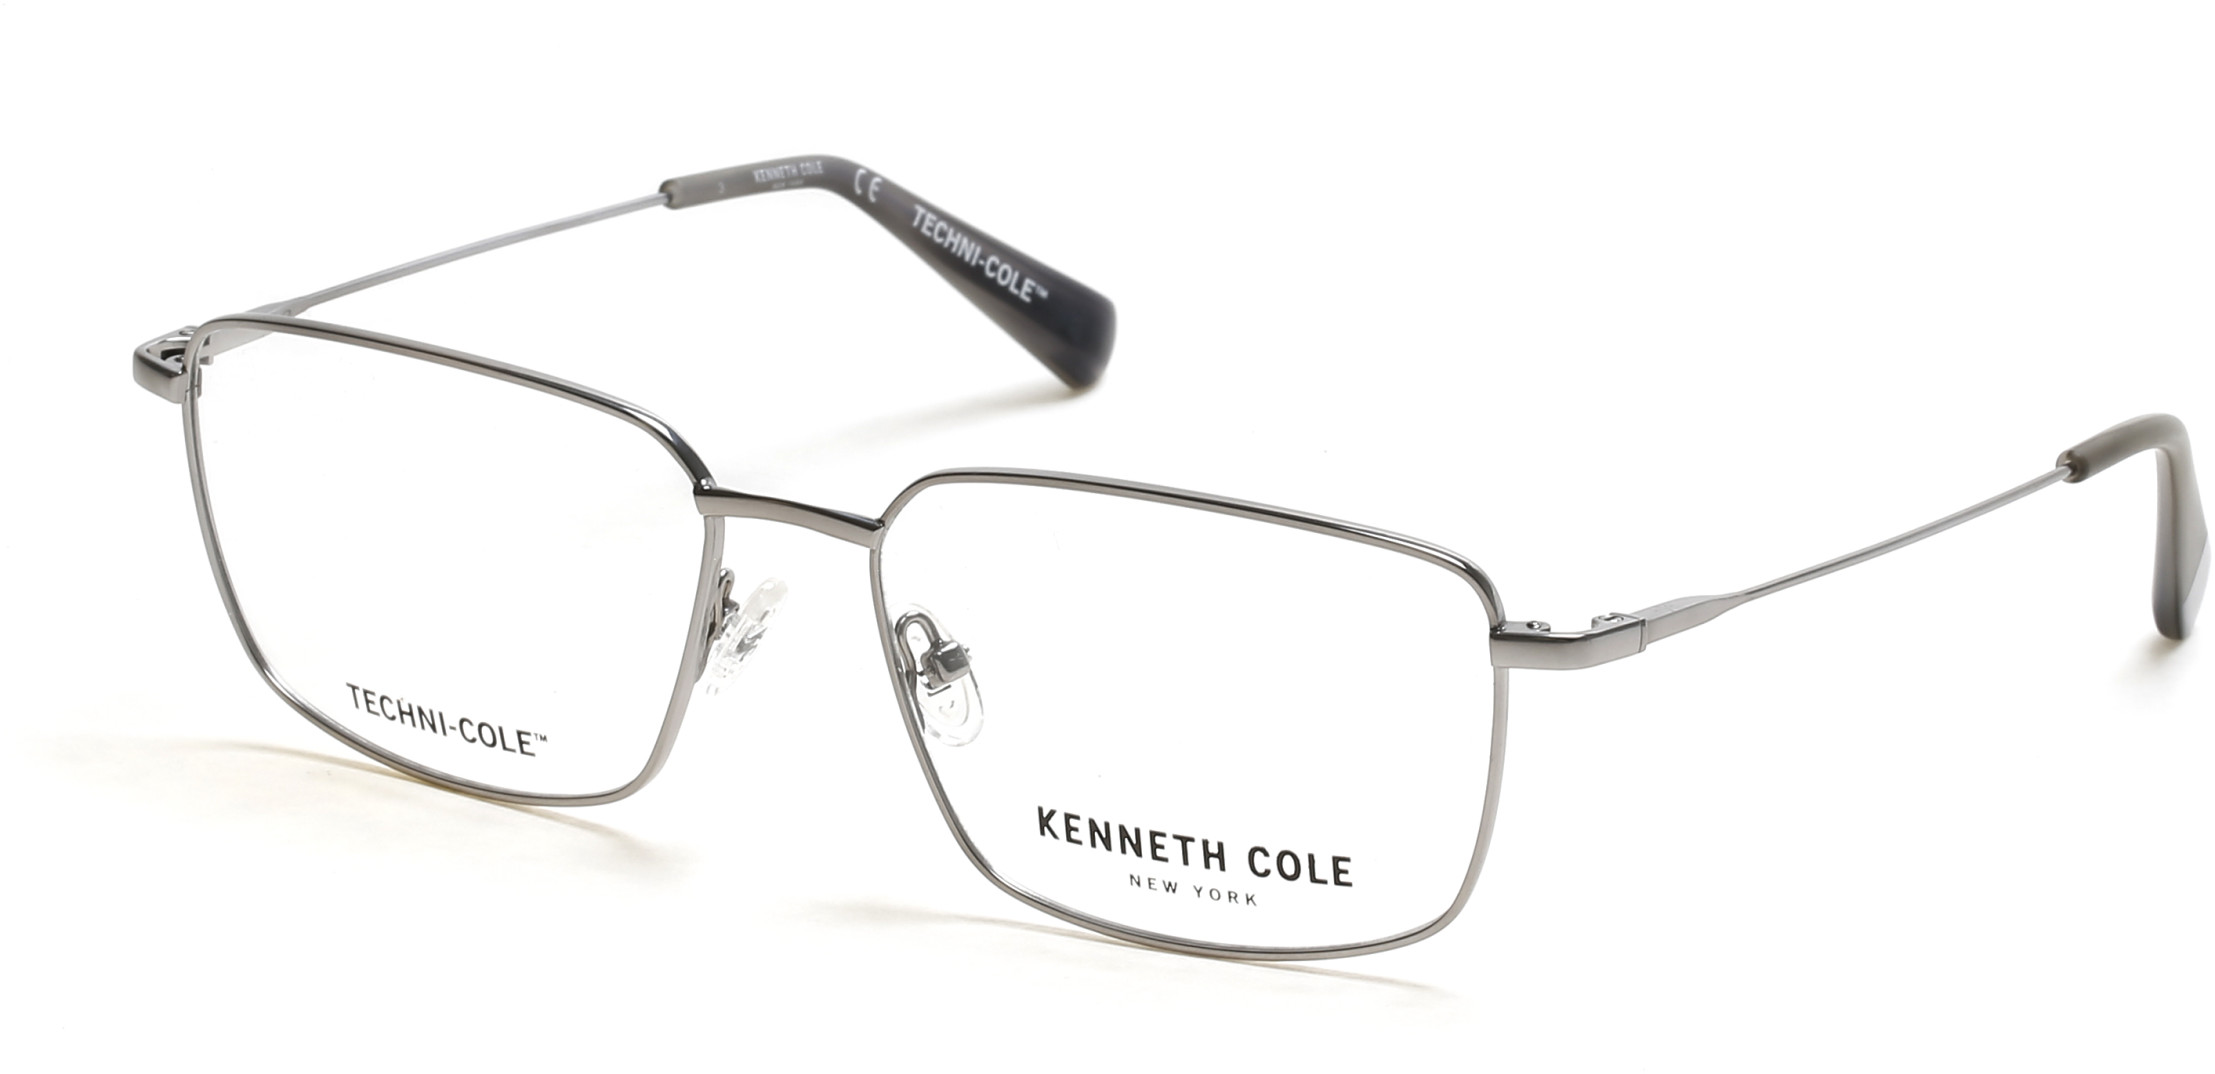 KENNETH COLE NY 0331 010